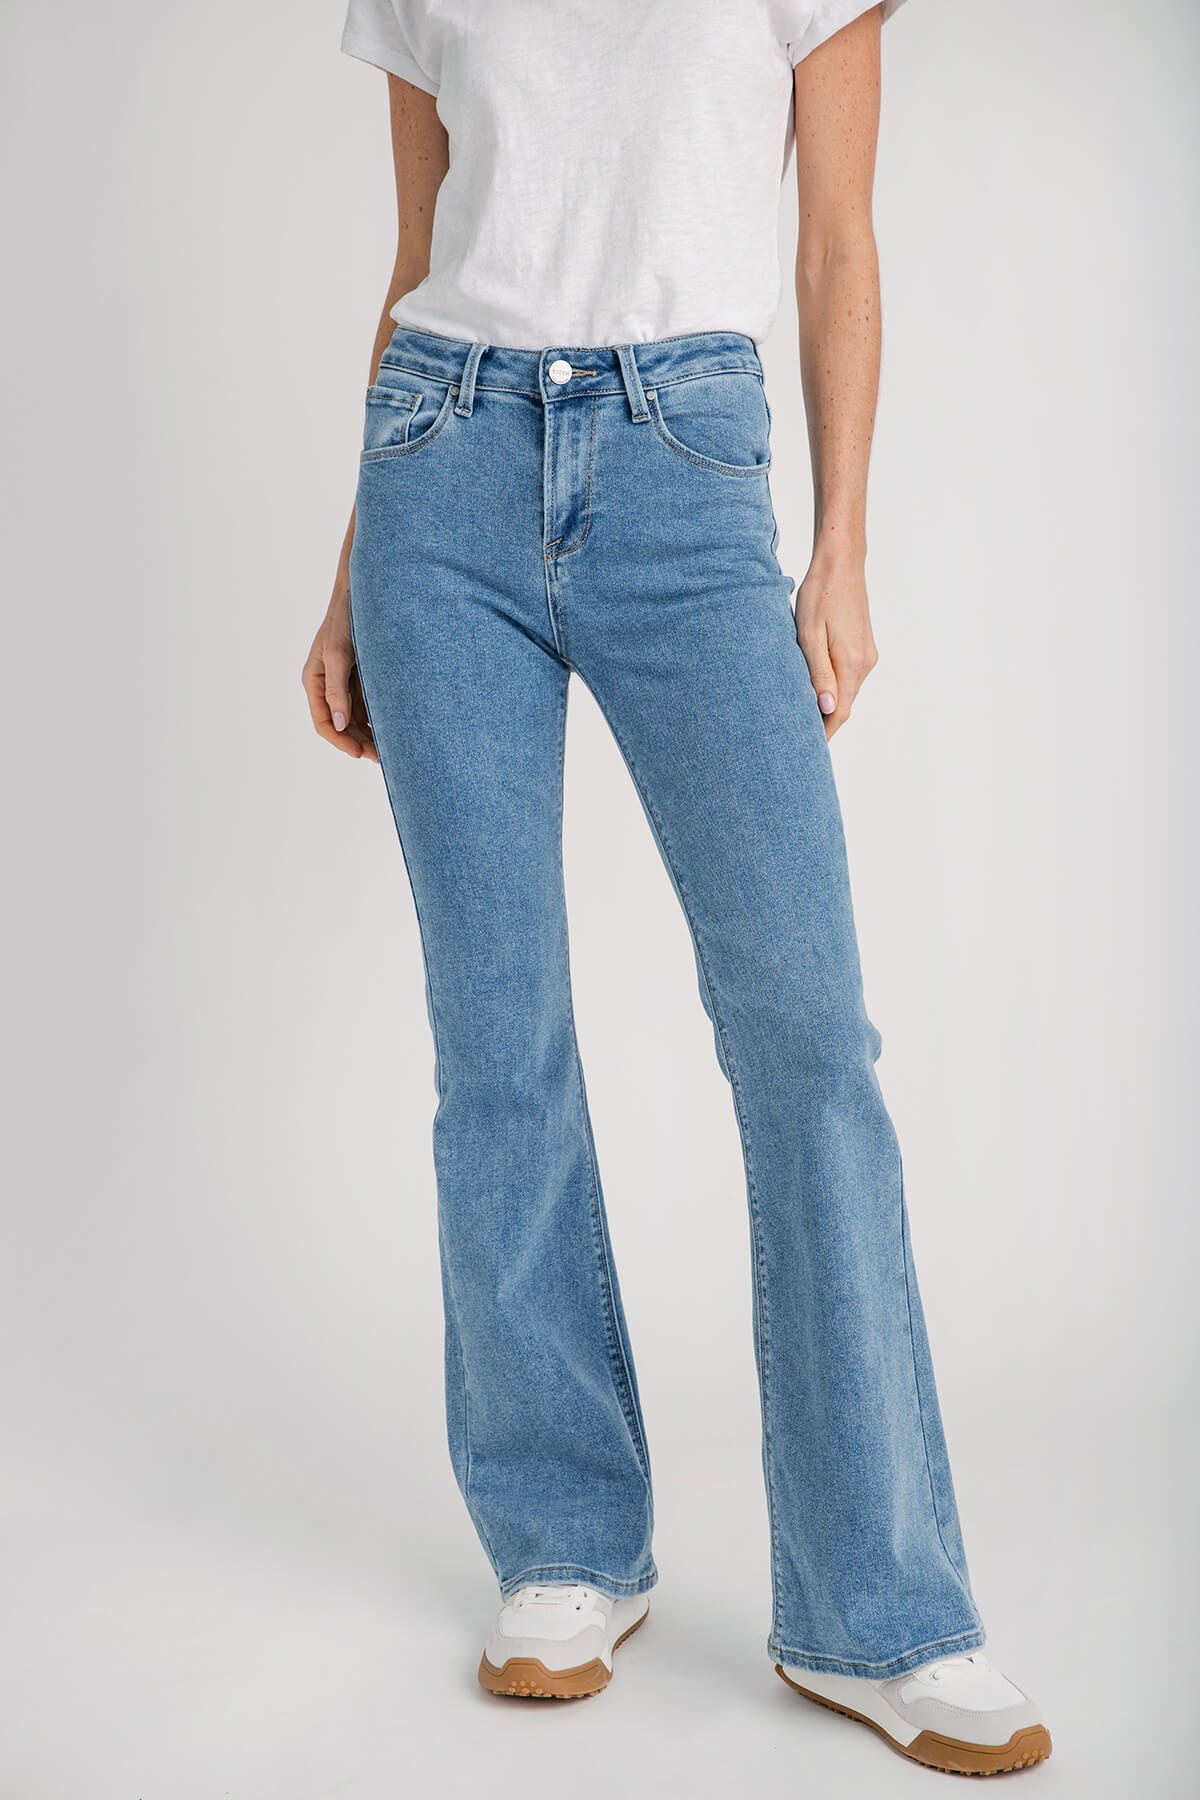 Women's Relaxed Fit Pull-On Flare Jeans - Knox Rose | eBay